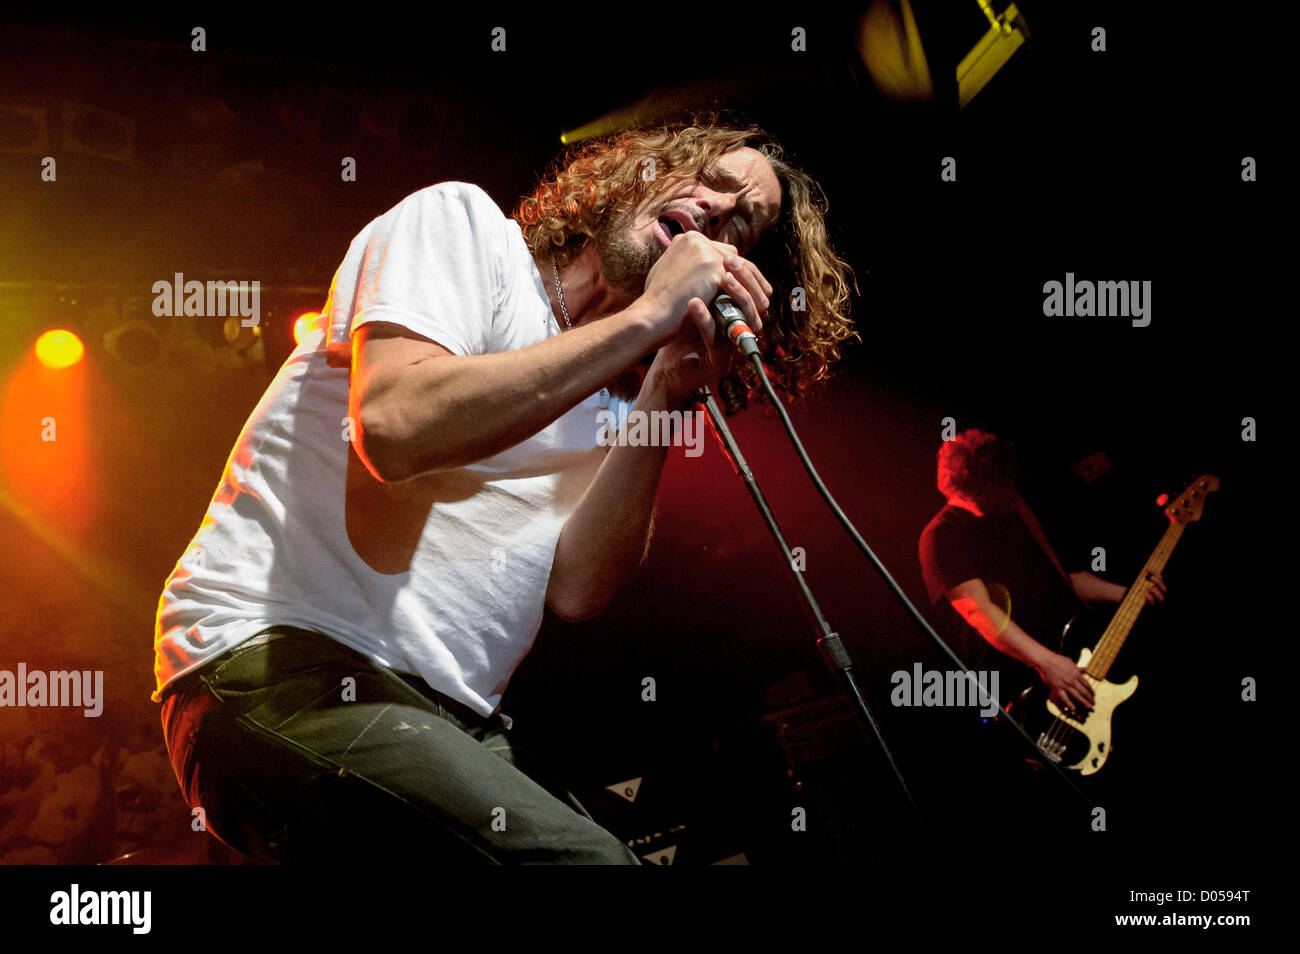 Nov. 16, 2012 - Toronto, Ontario, Canada - Seattle grunge vets Soundgarden touched down at Toronto and the Phoenix Theatre as an intimate warm-up date for their first studio CD in 16 years, 'King Animal', which came out Nov. 13. In picture: CHRIS CORNELL, BEN SHEPHERD (Credit Image: © Igor Vidyashev/ZUMAPRESS.com) Stock Photo